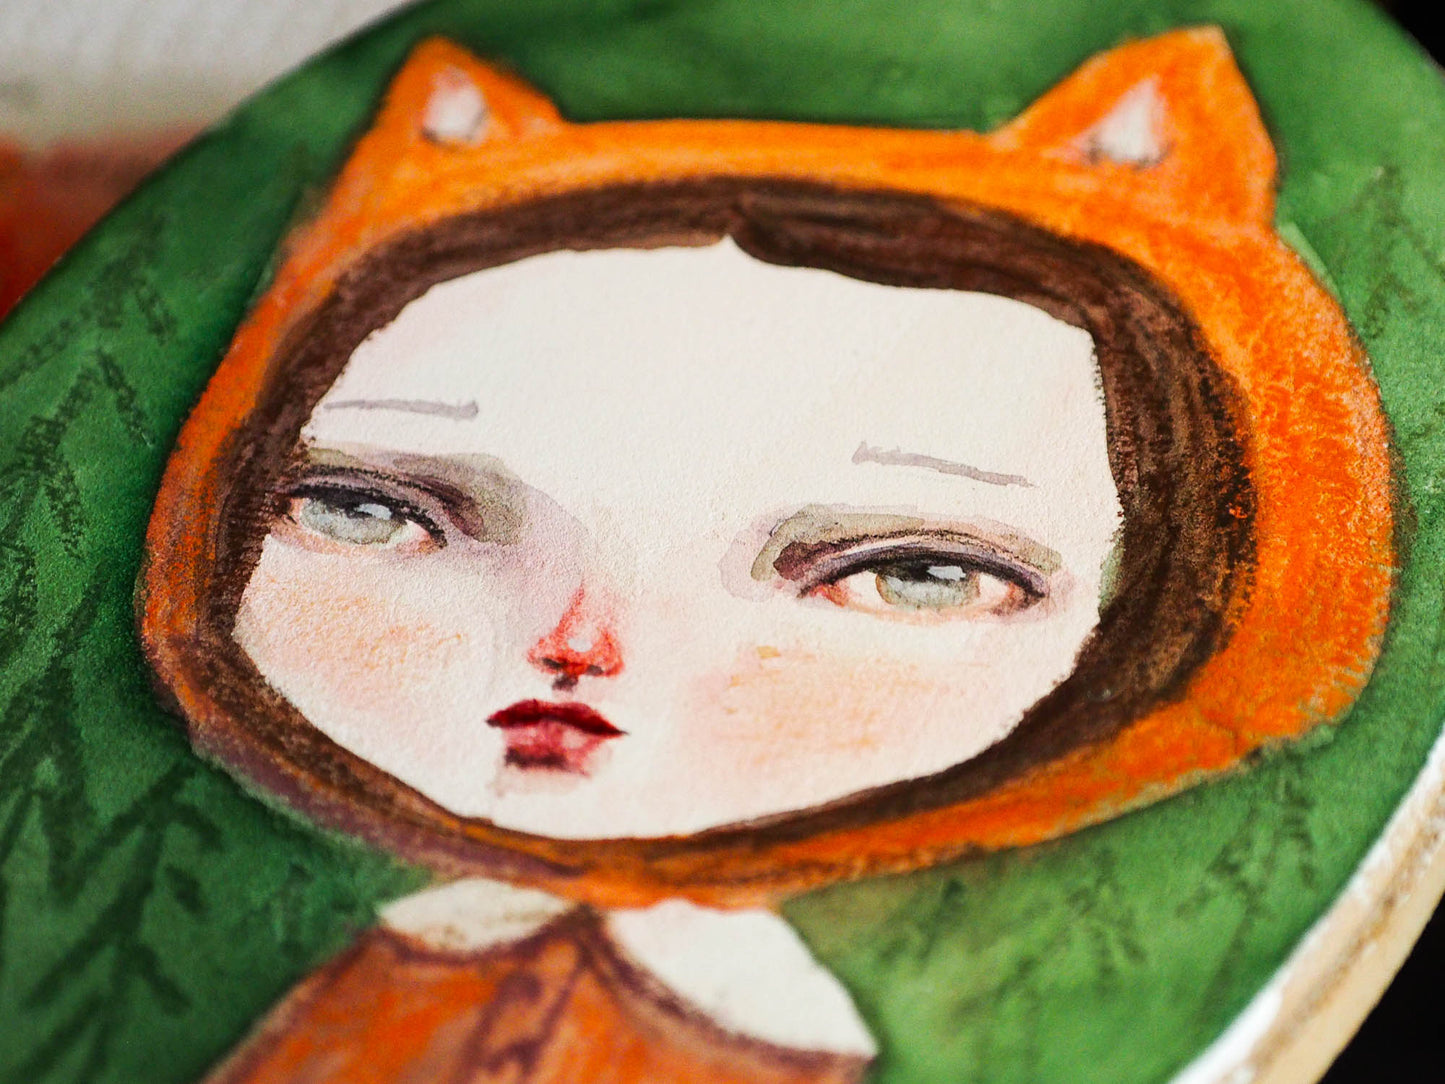 THE FOX - A red Fox by Danita Art, inspired by the inhabitants of the forest